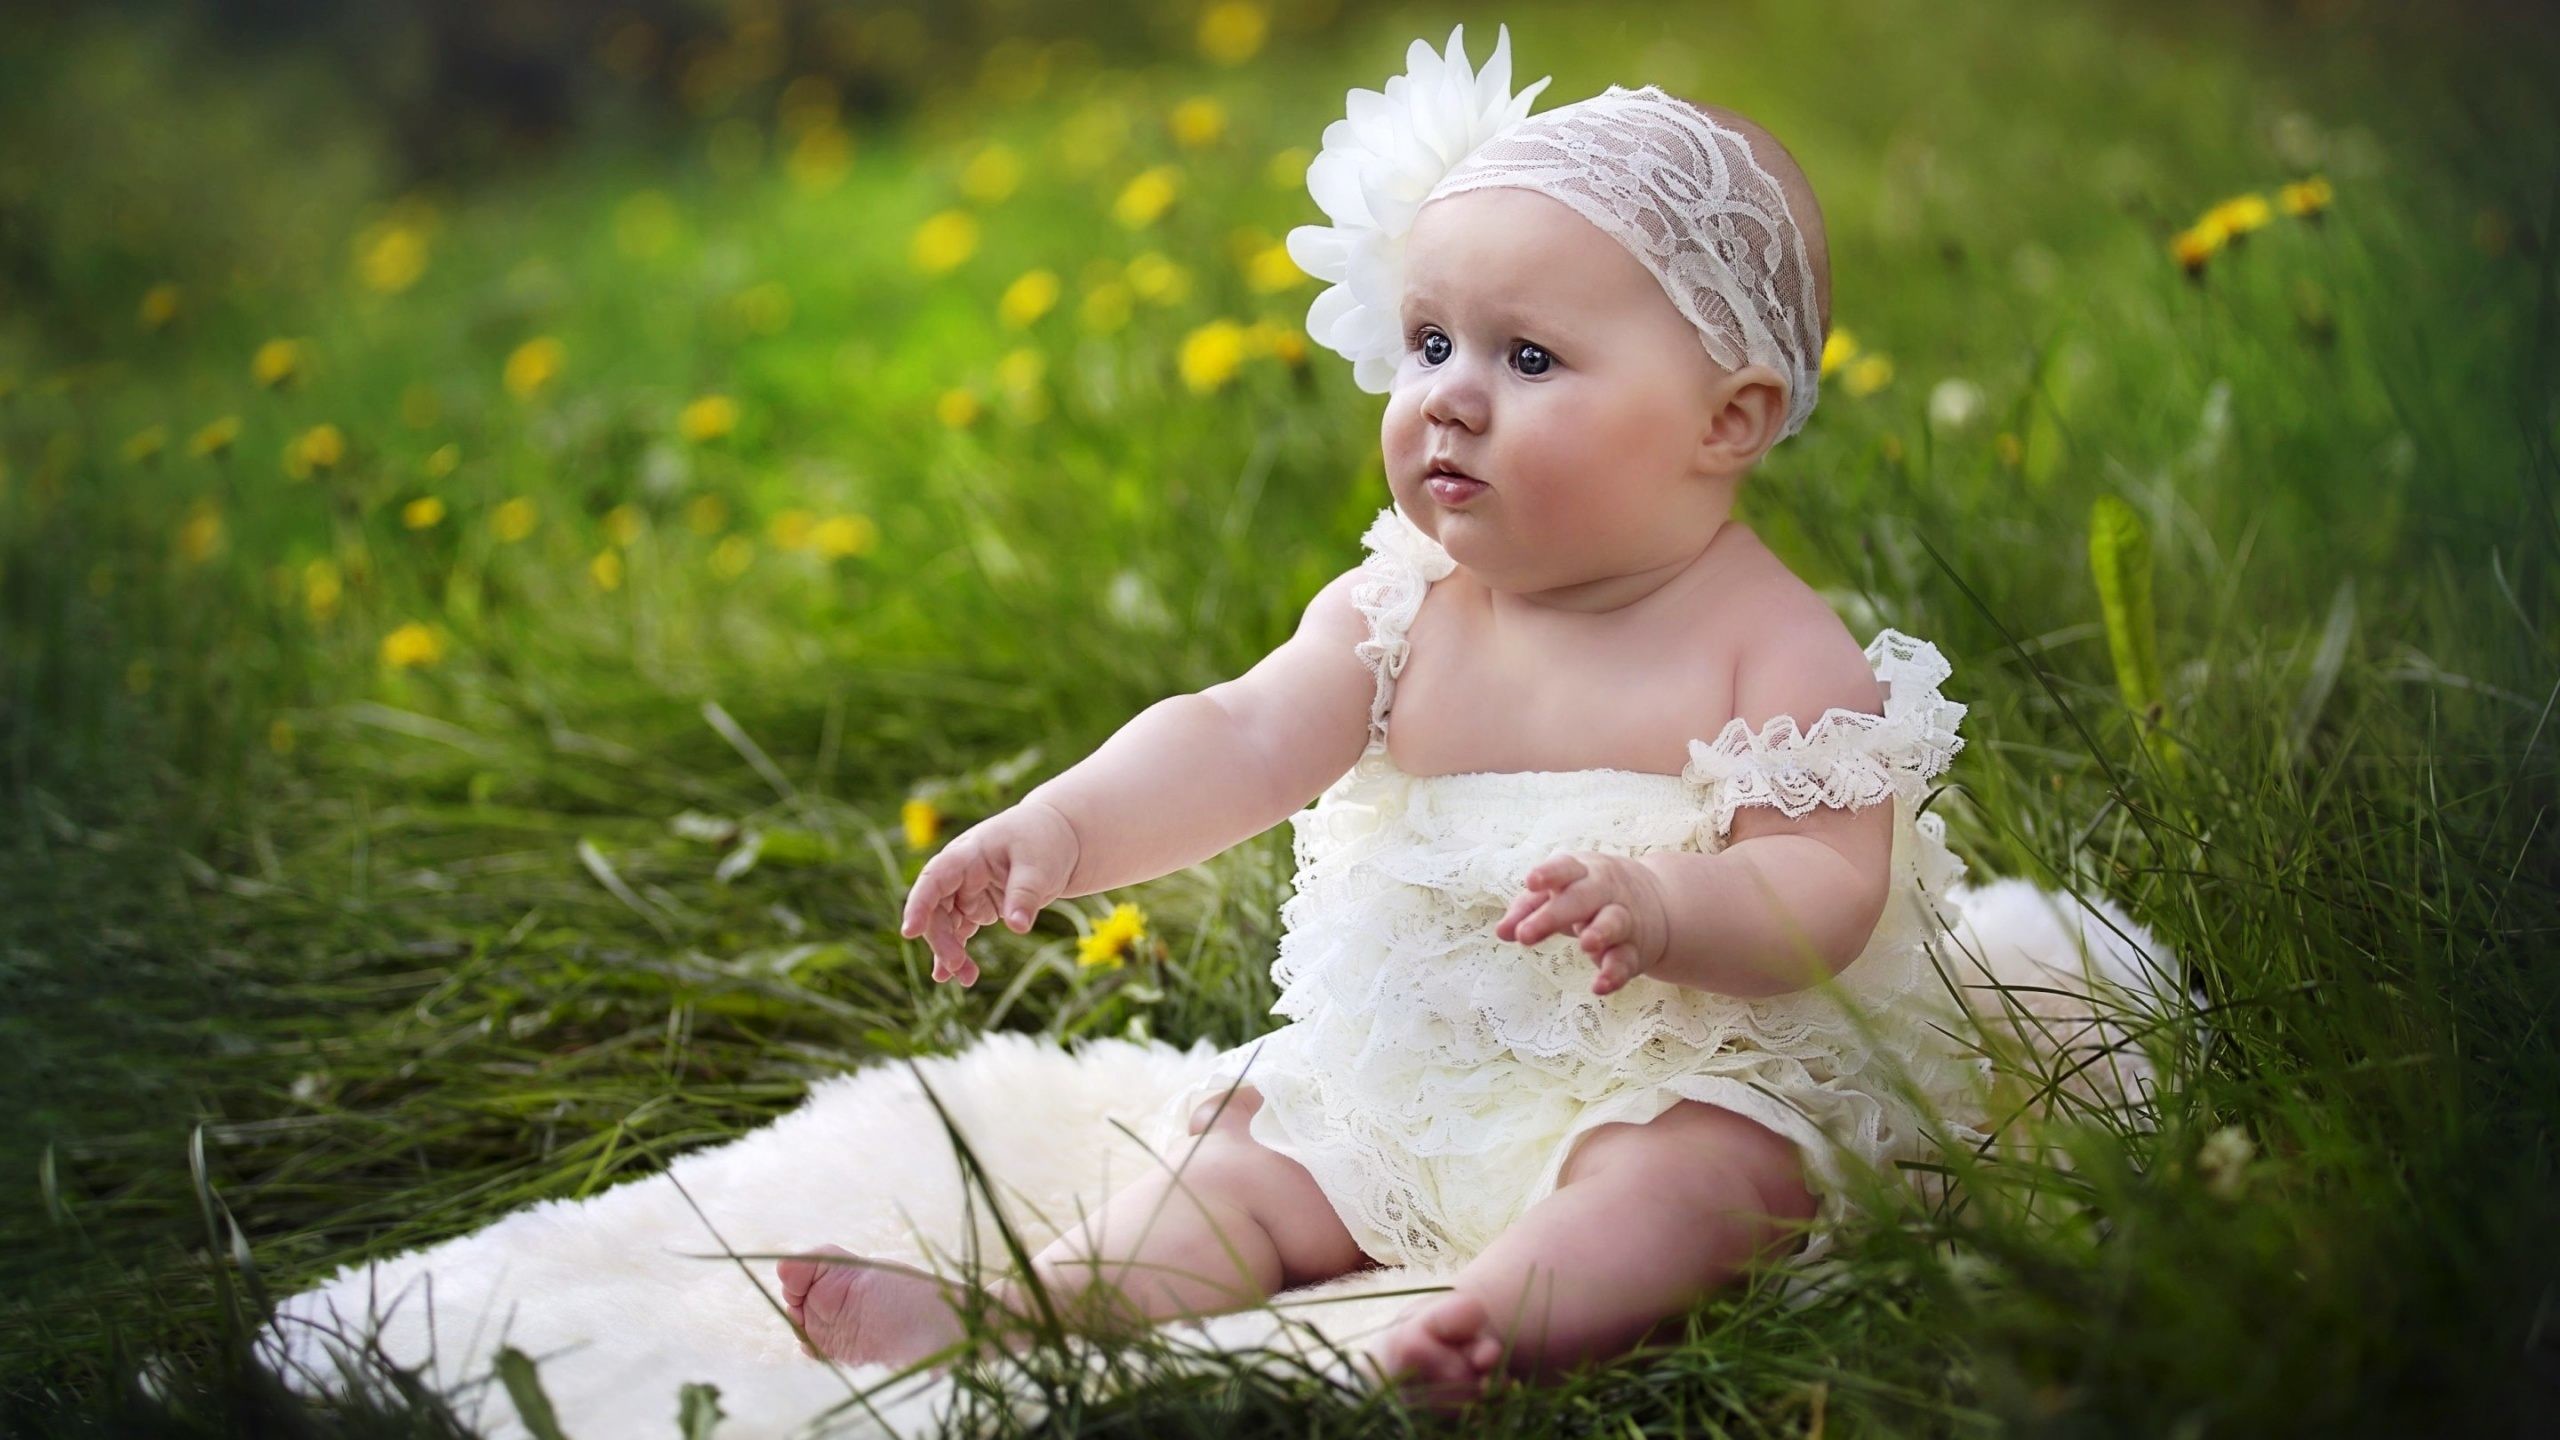 Cute Baby Girl with Pink Dress Wallpaper | HD Wallpapers